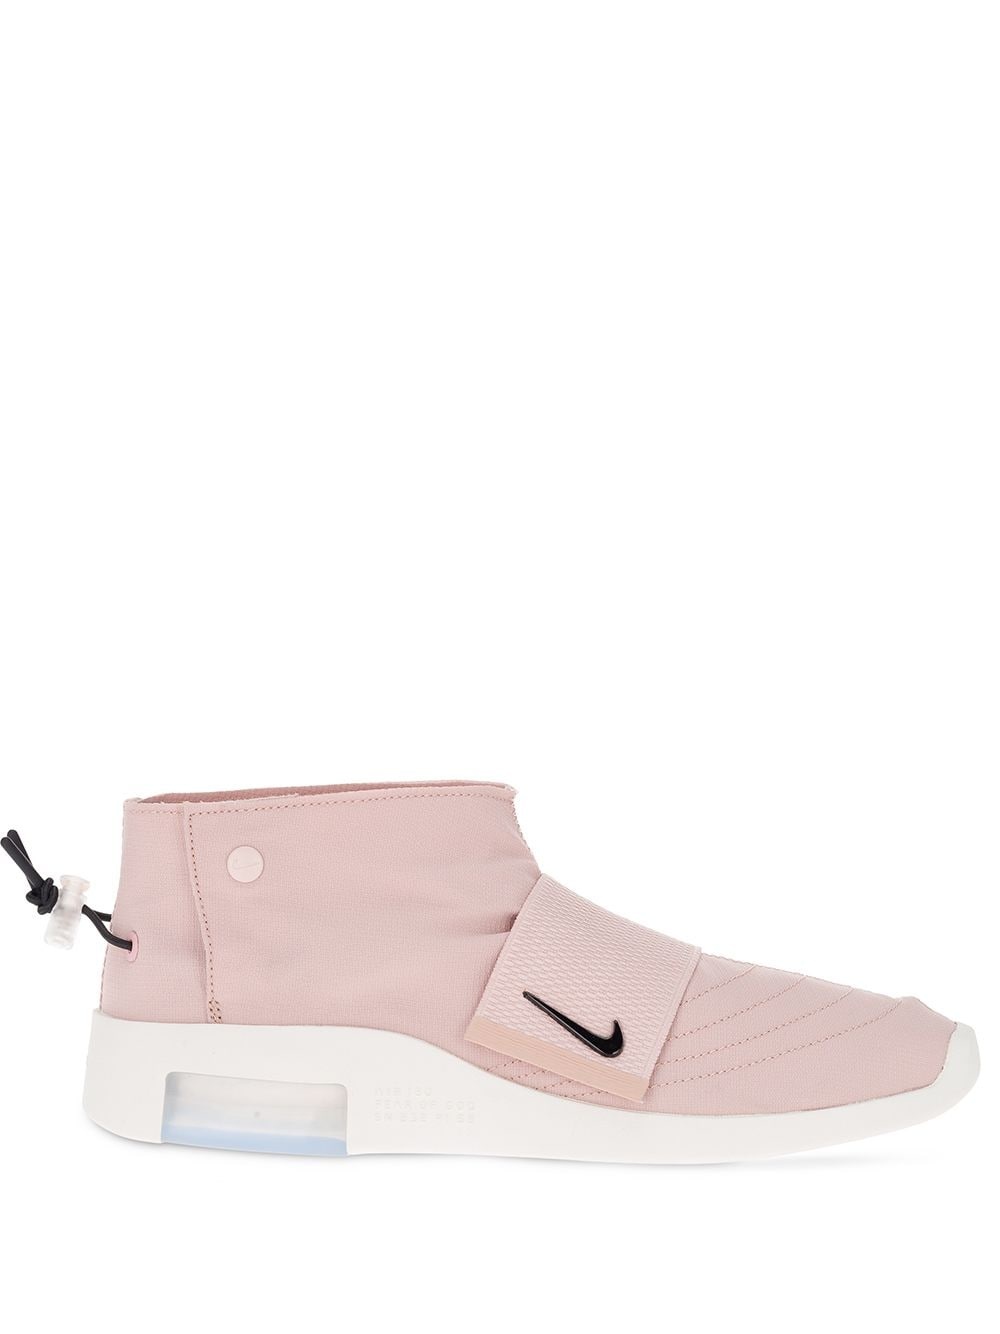 Air Fear Of God Moccasin "Particle Beige" sneakers - 1